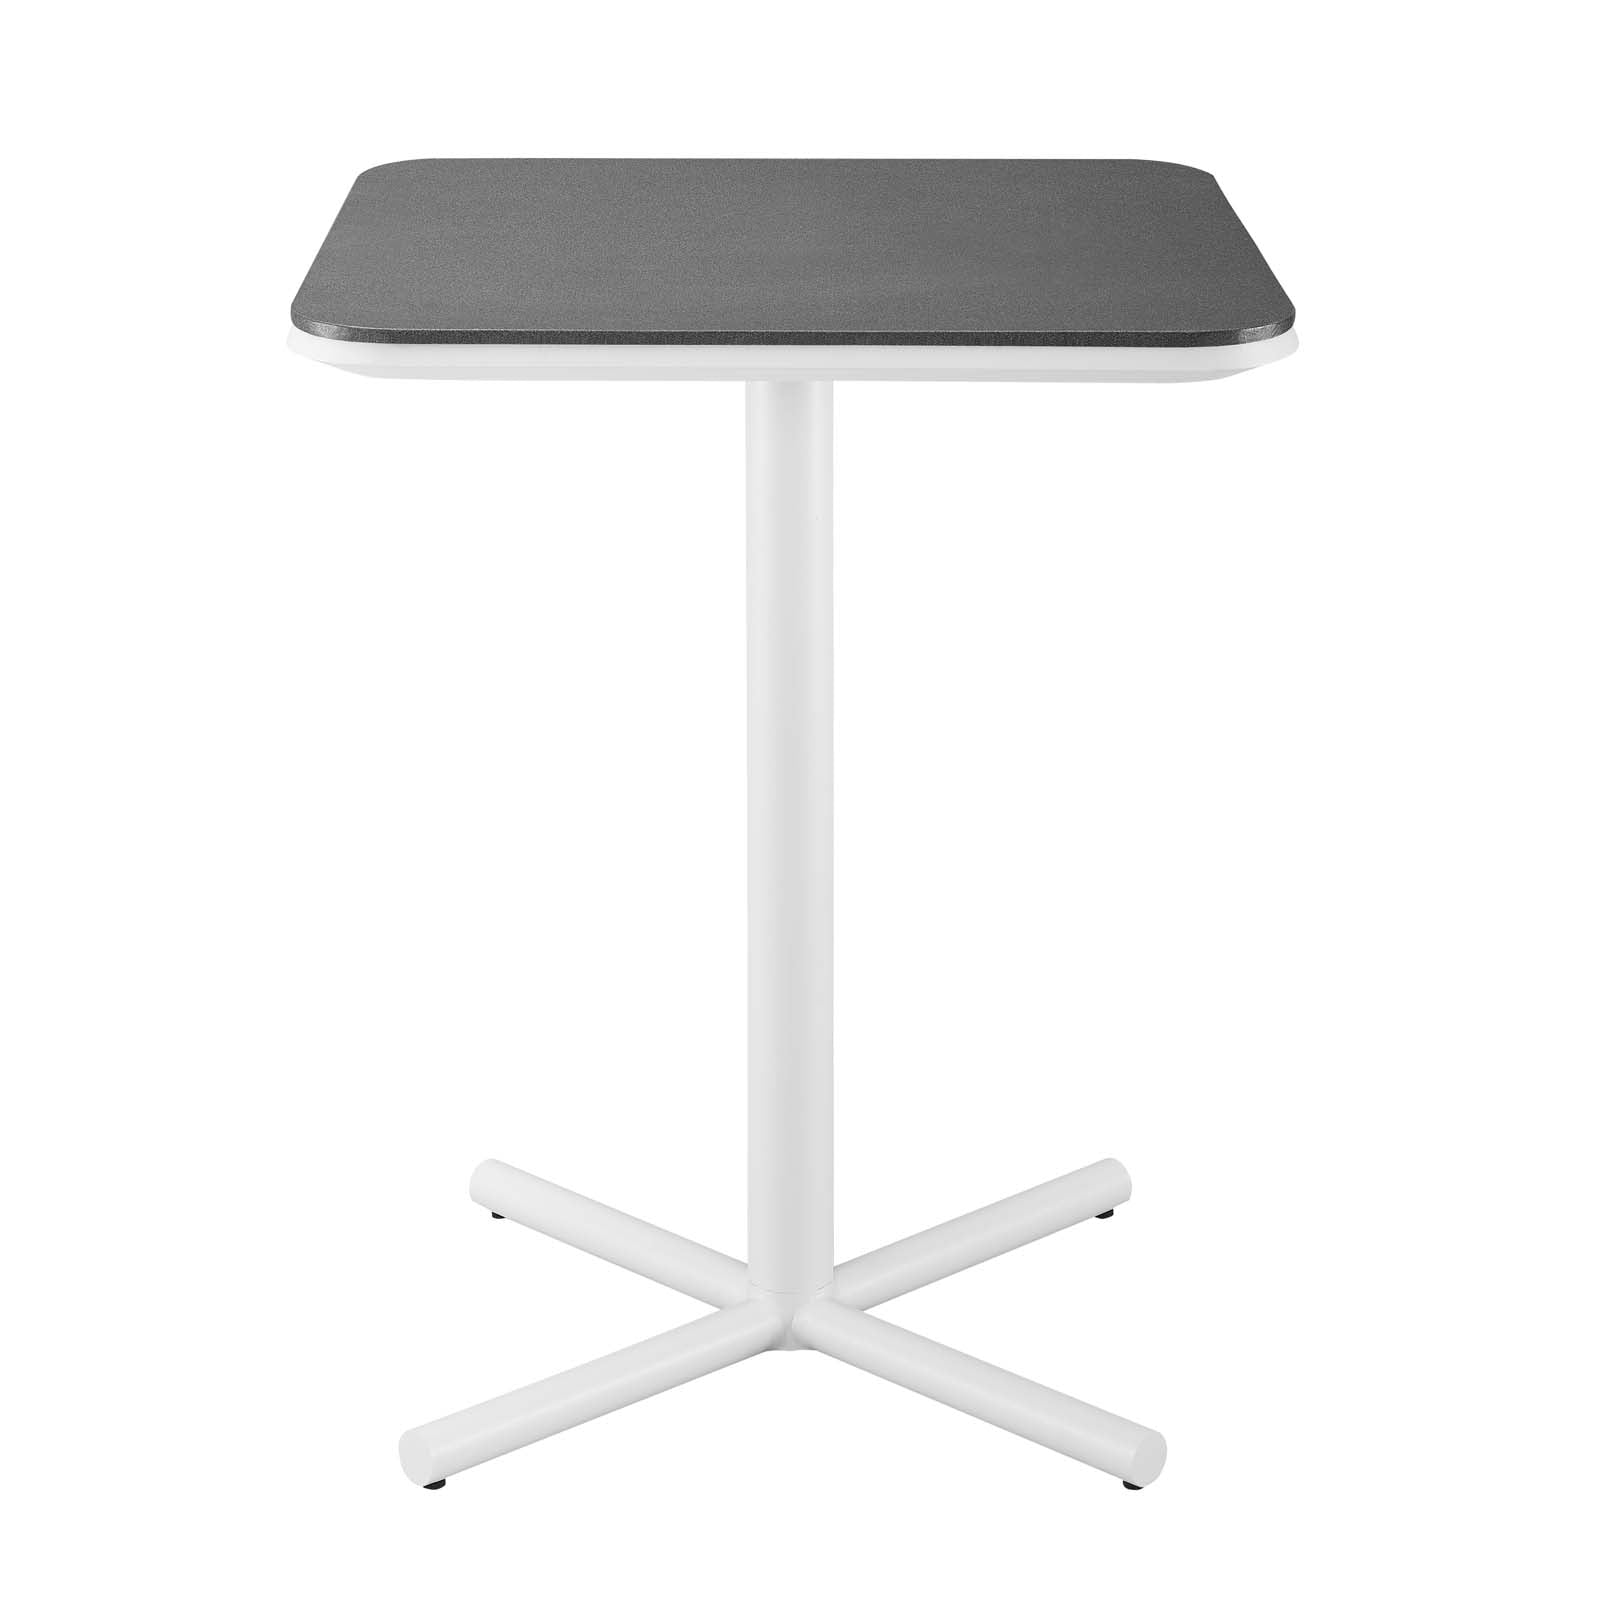 Raleigh Outdoor Patio Aluminum Bar Table - East Shore Modern Home Furnishings